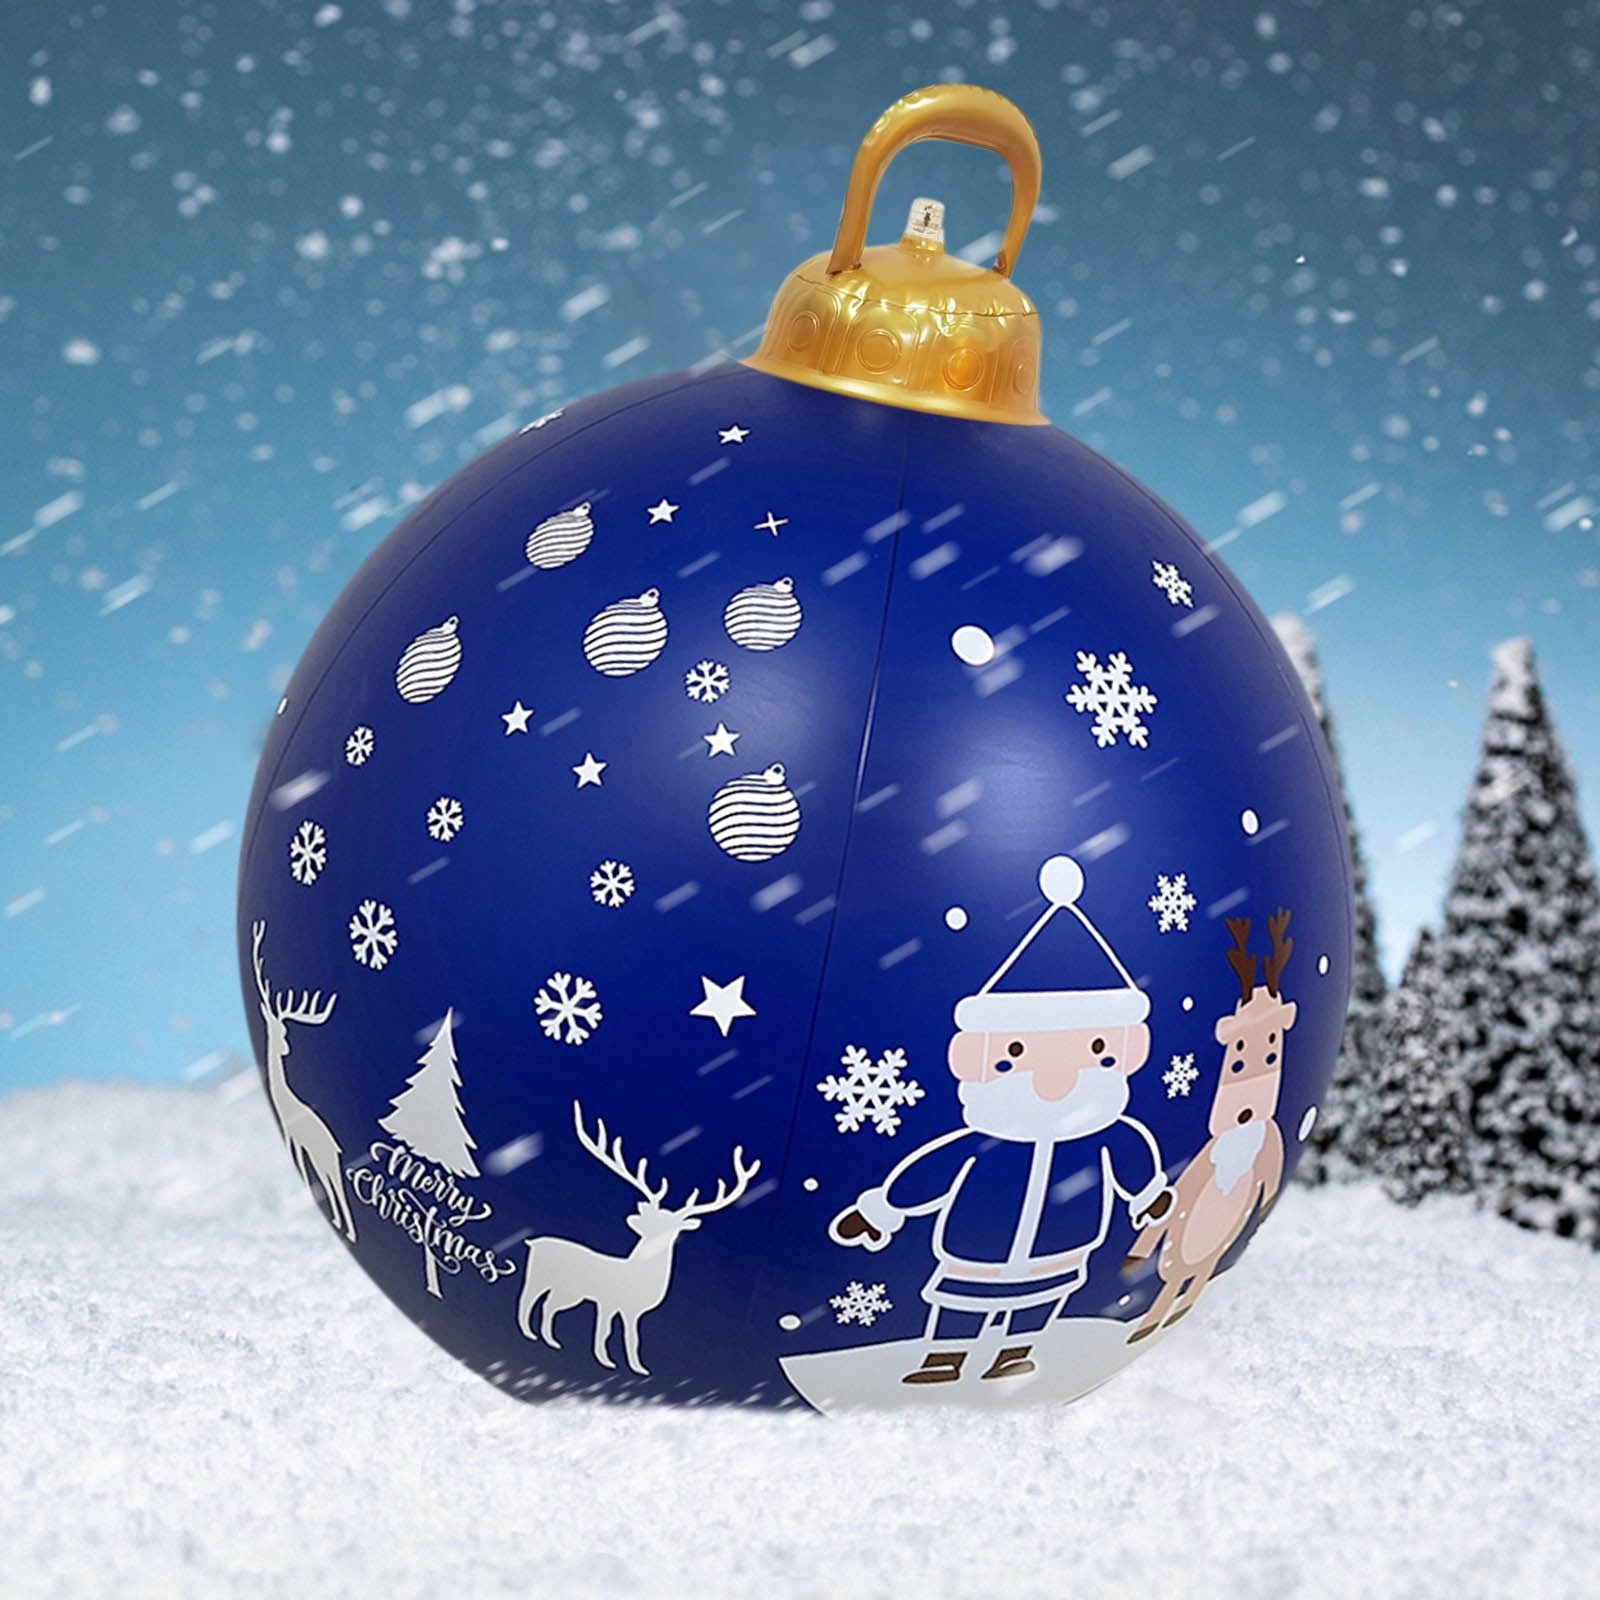 TUTUnaumb 24 Inch Giant PVC Christmas Decorated Ball Inflatable ...